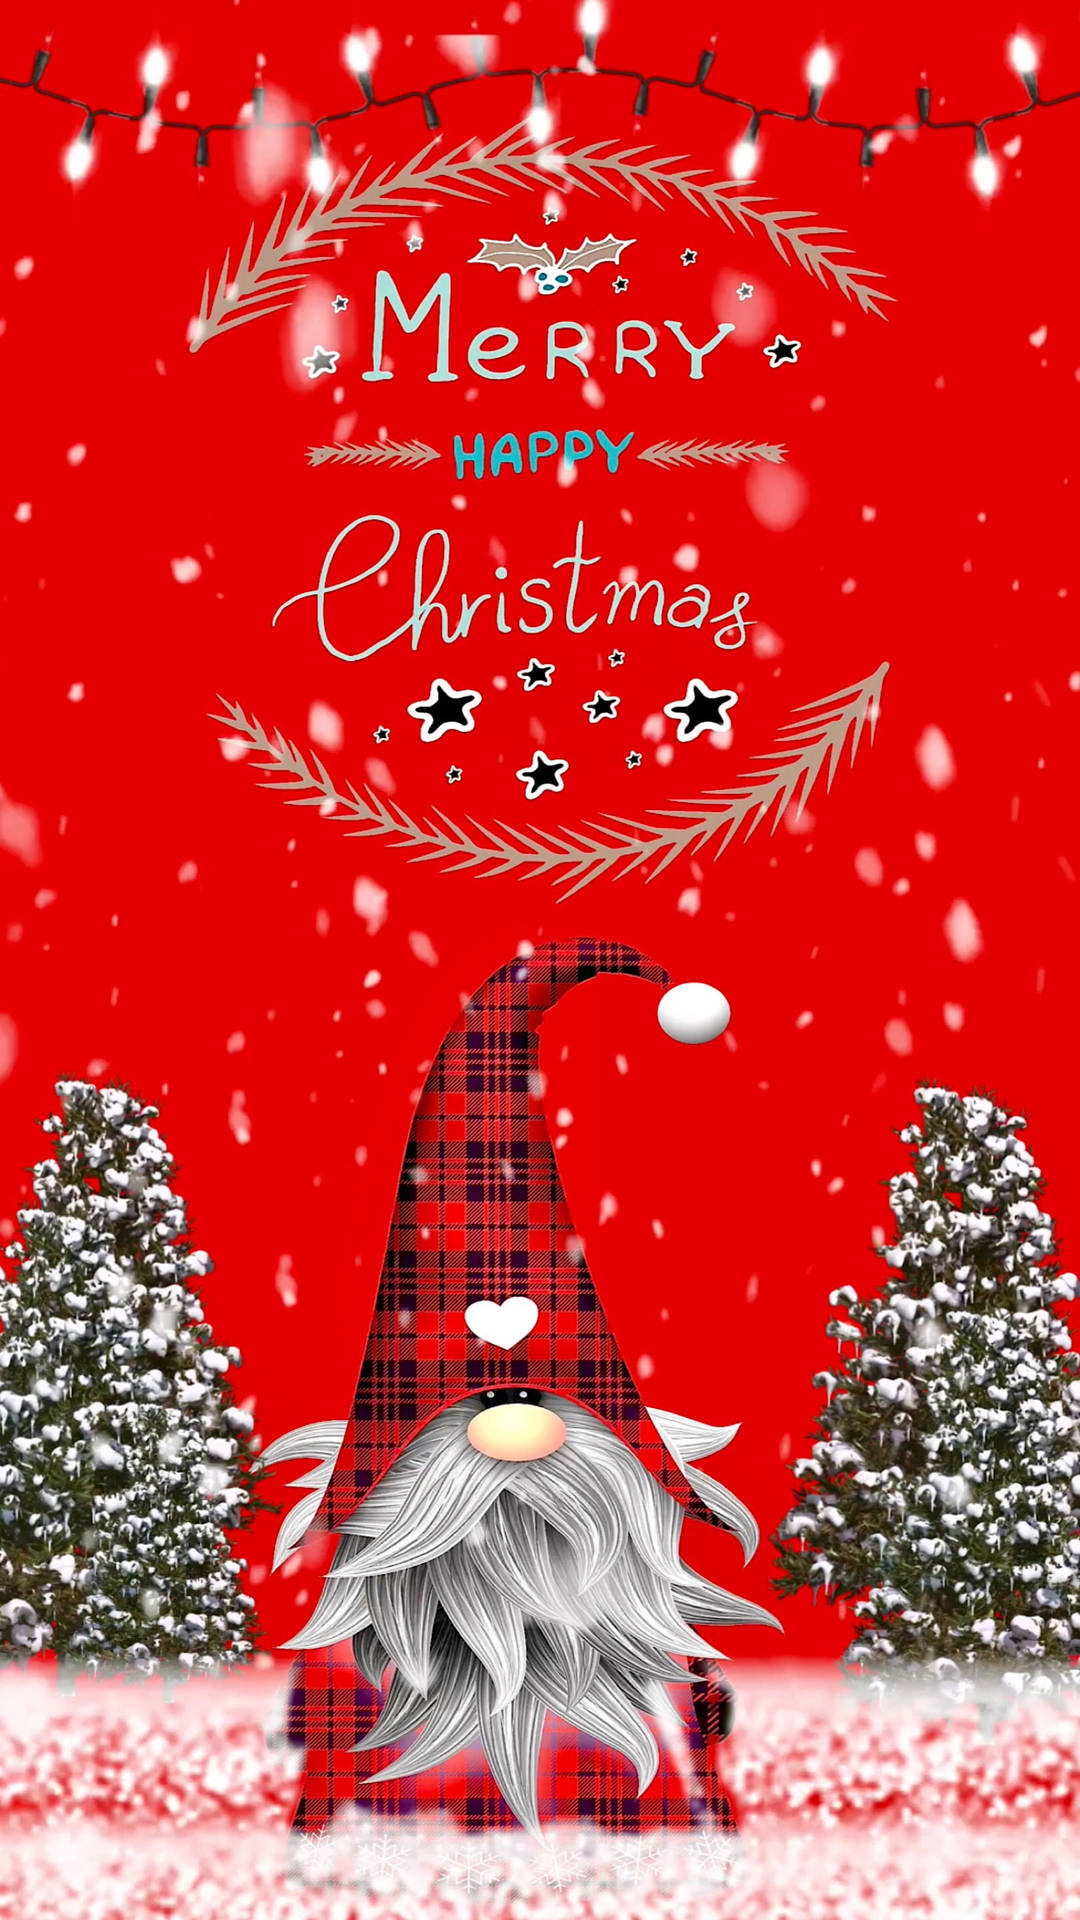 12400 Christmas Gnome Stock Photos Pictures  RoyaltyFree Images   iStock  Merry christmas gnome Christmas gnome vector